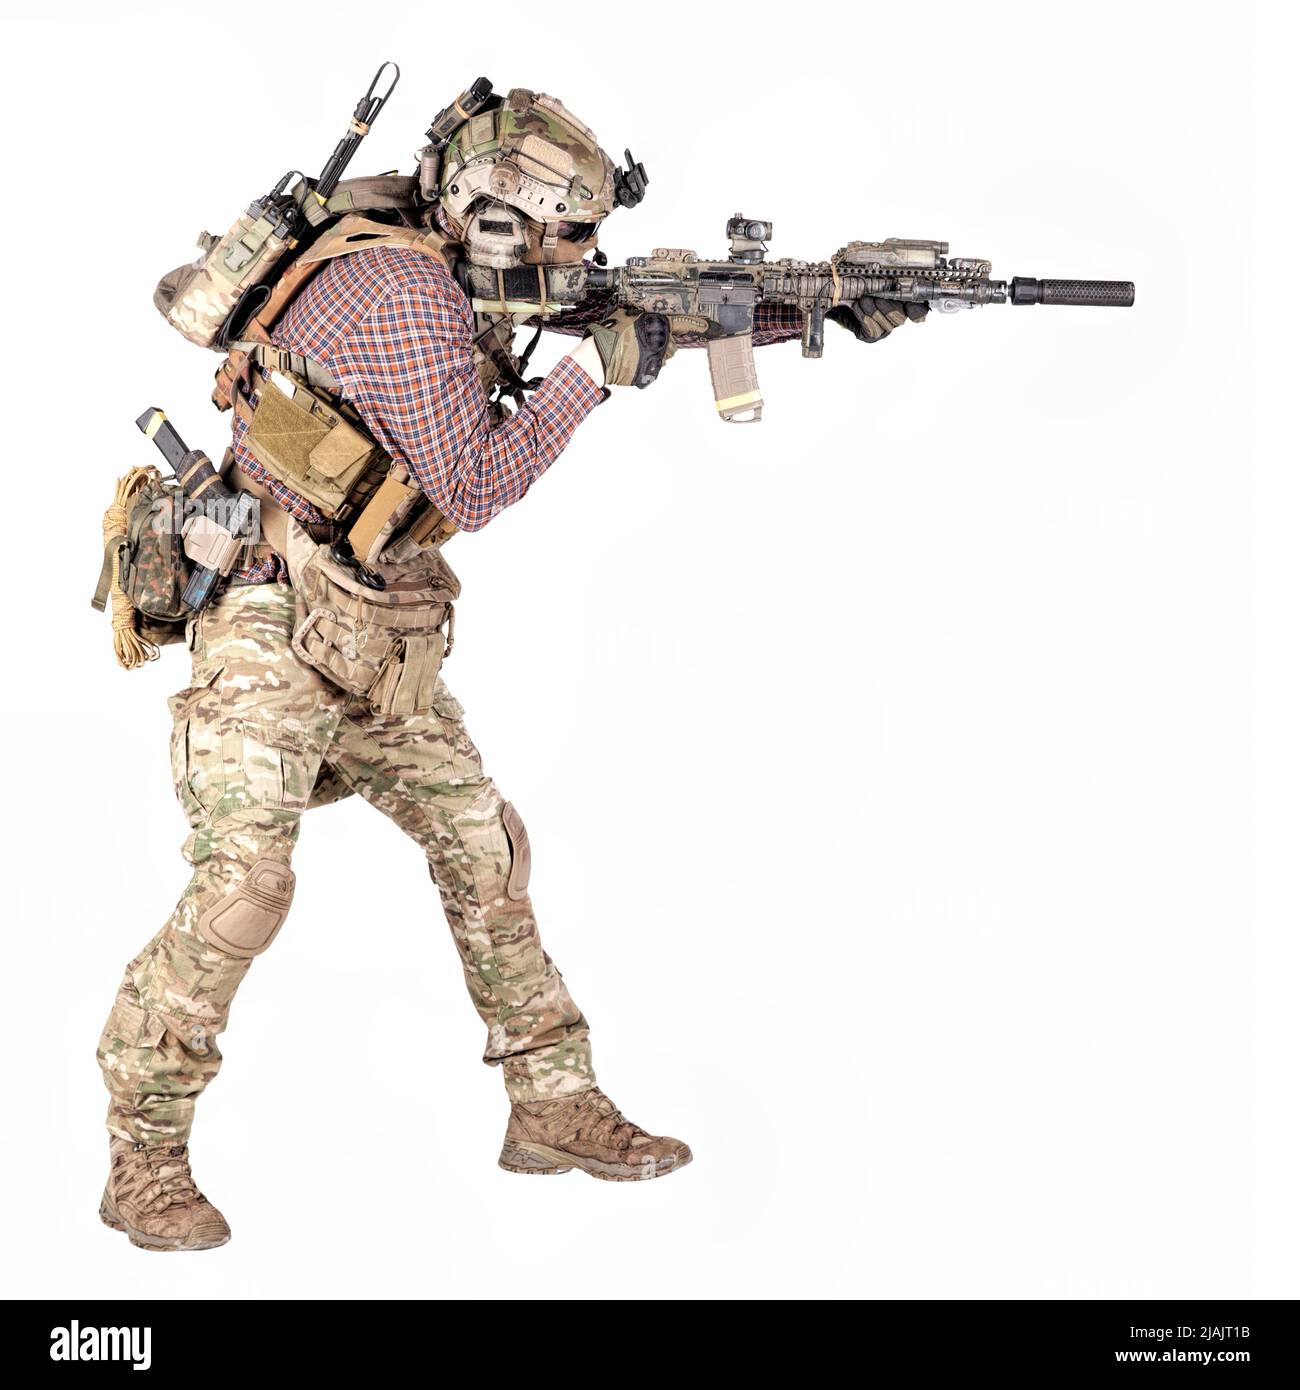 Full length portrait of airsoft player in camoflauge uniform and radio headset, aiming service rifle. Stock Photo